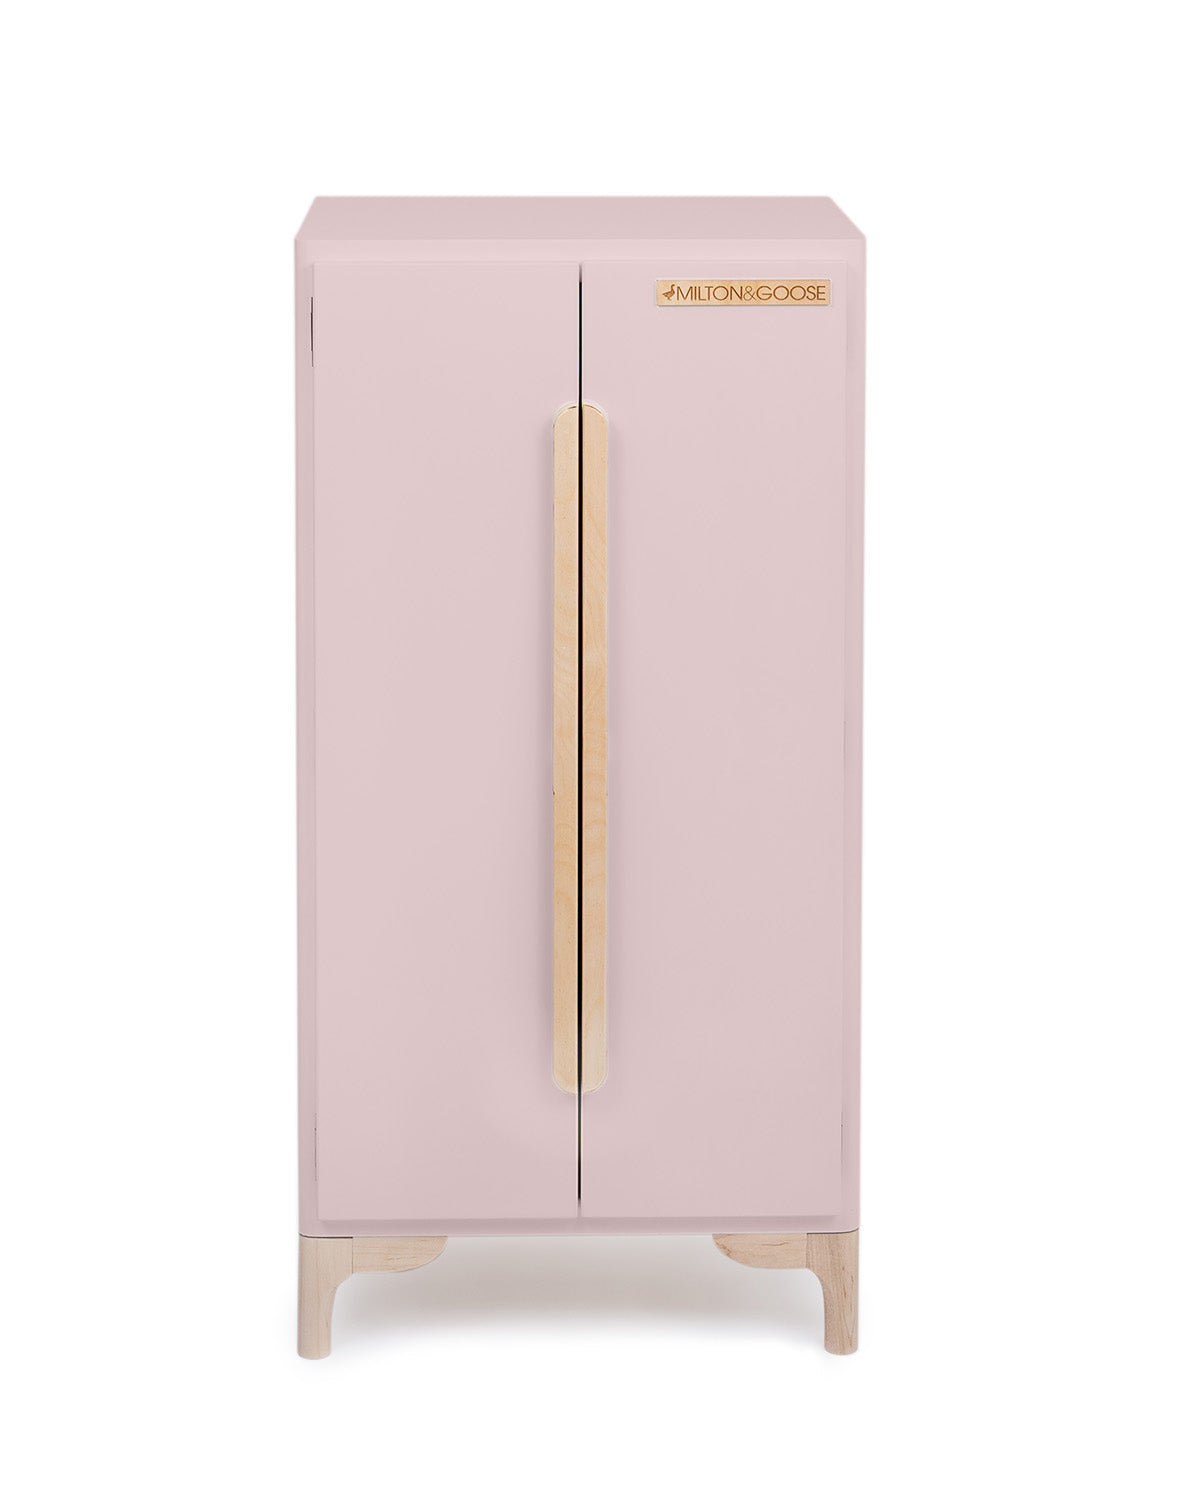 Milton & Goose's Luca Play Refrigerator in Dusty Rose, a pink/gray color.